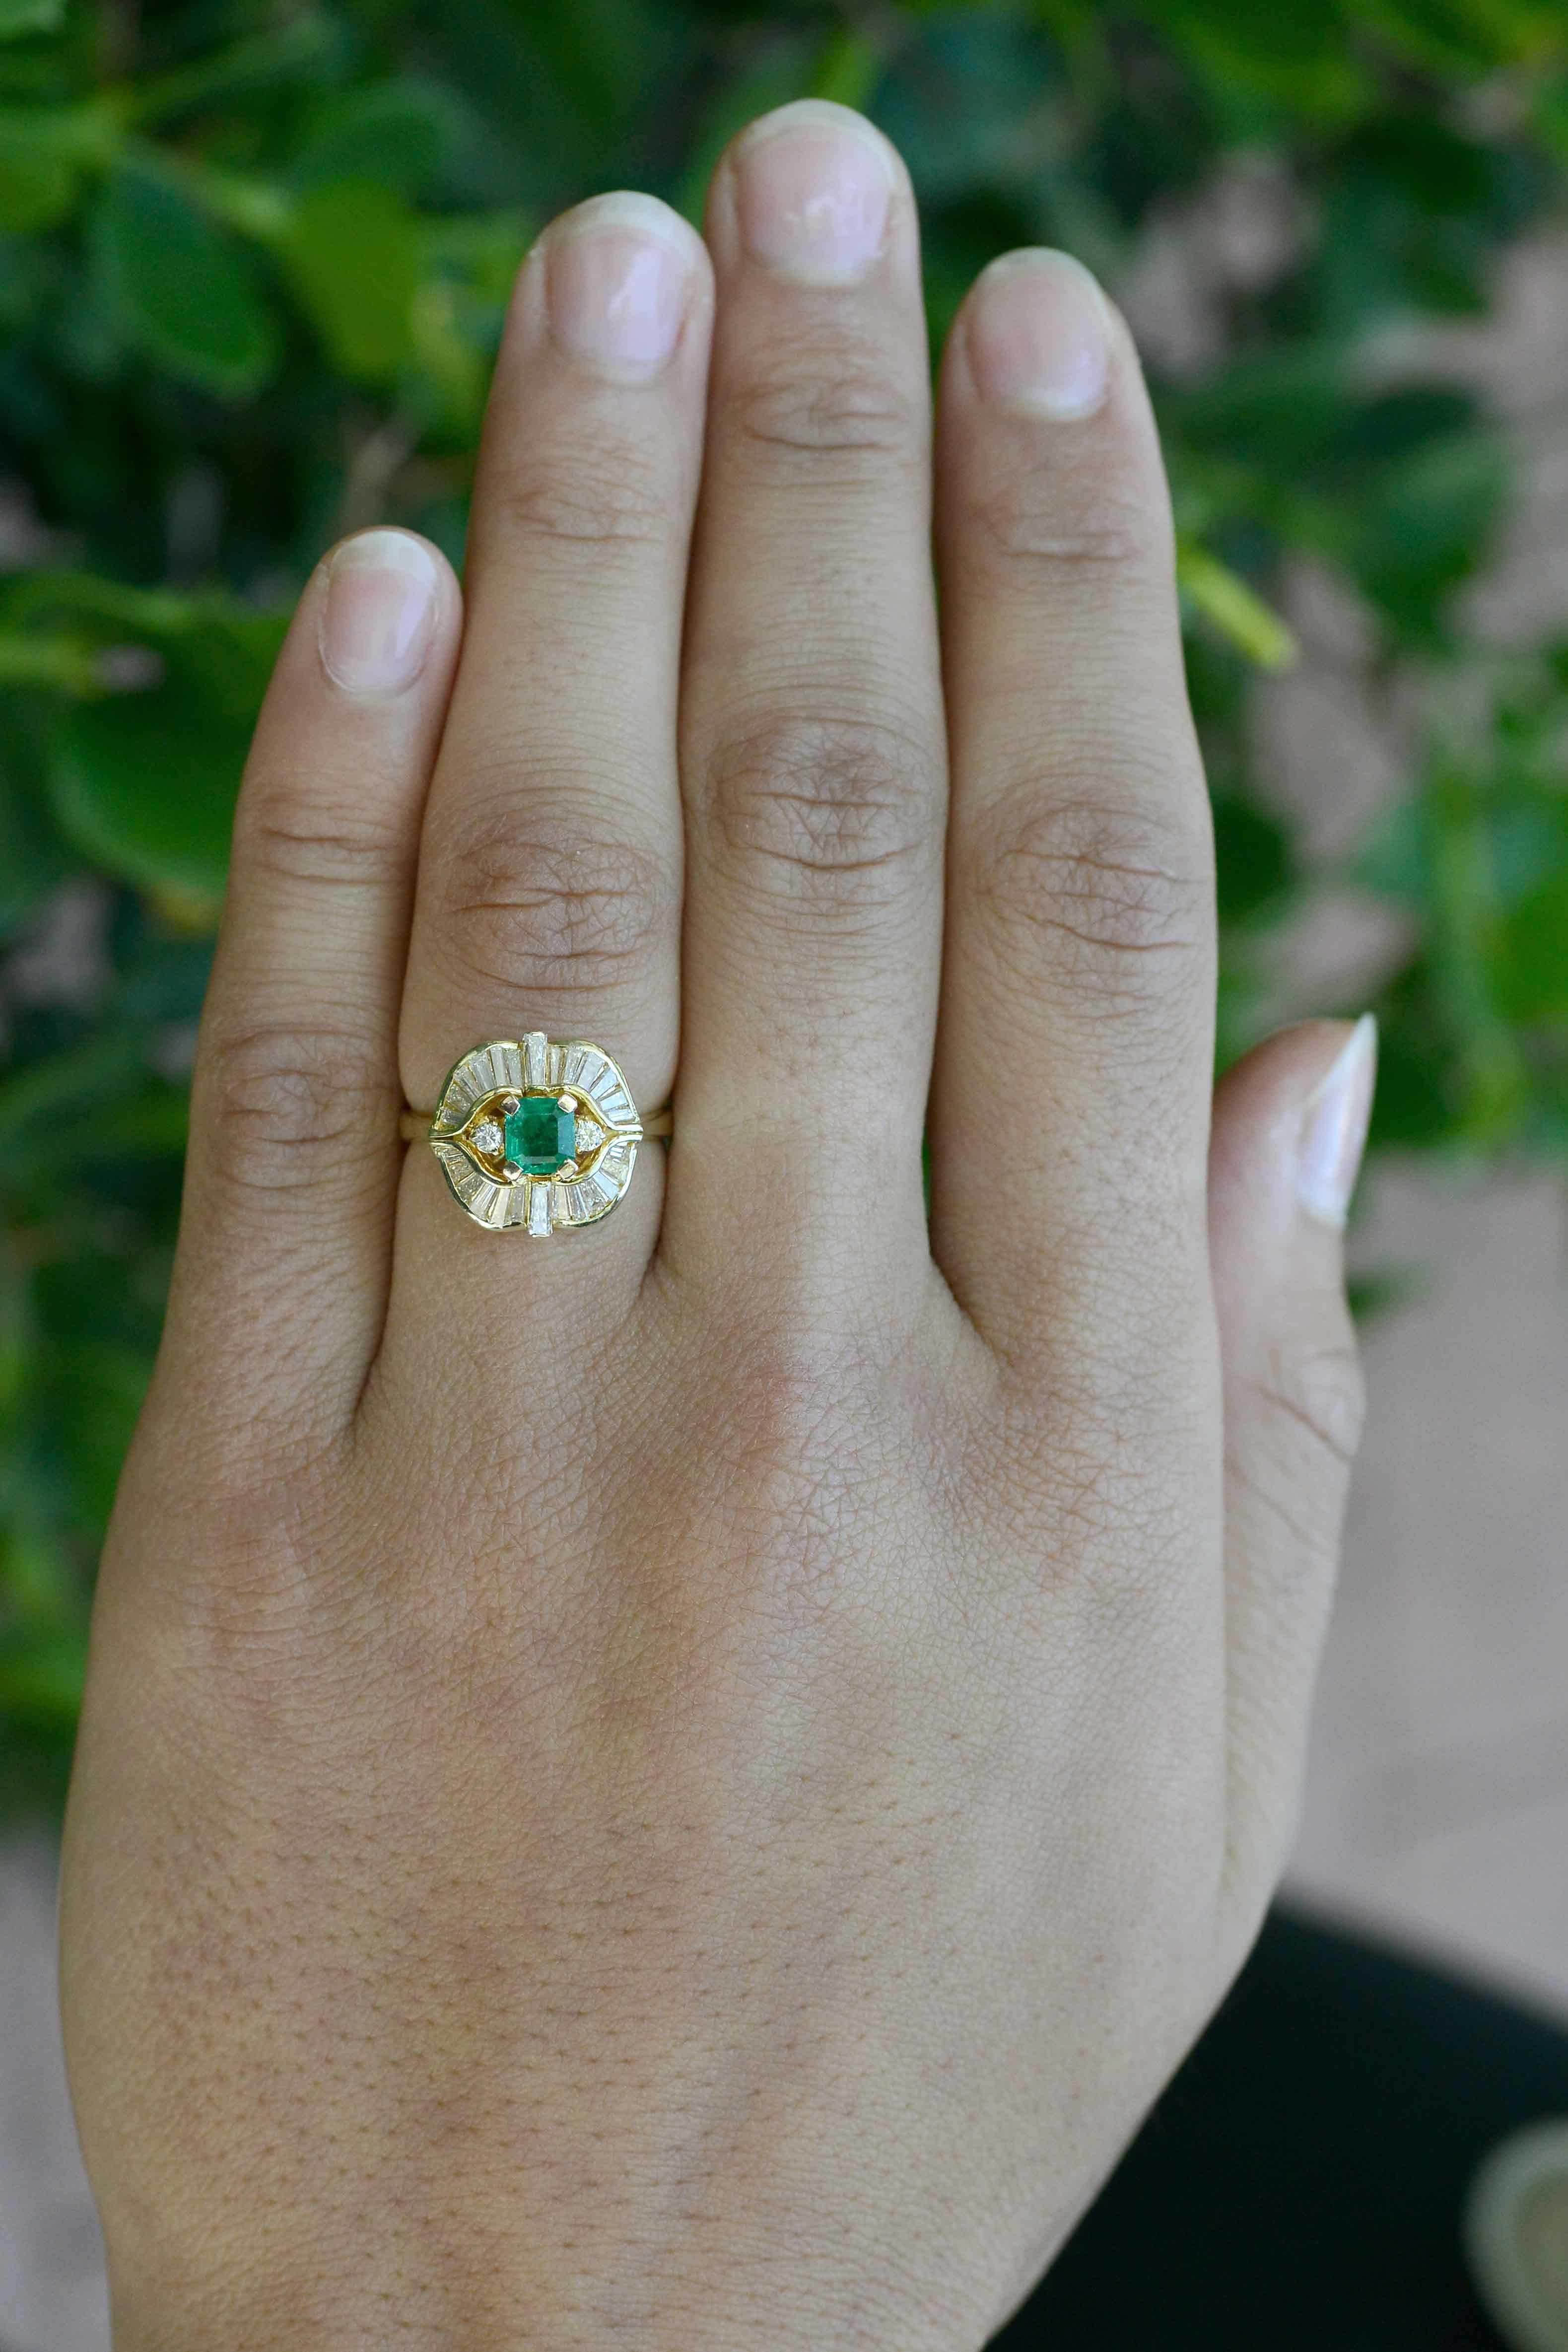 A sparkling and verdant vintage emerald and diamond cocktail ring in a flowing ballerina style. Eminently wearable as a gemstone engagement ring or right hand statement ring, the 1/2 carat emerald glows with a fire from within and is complimented by